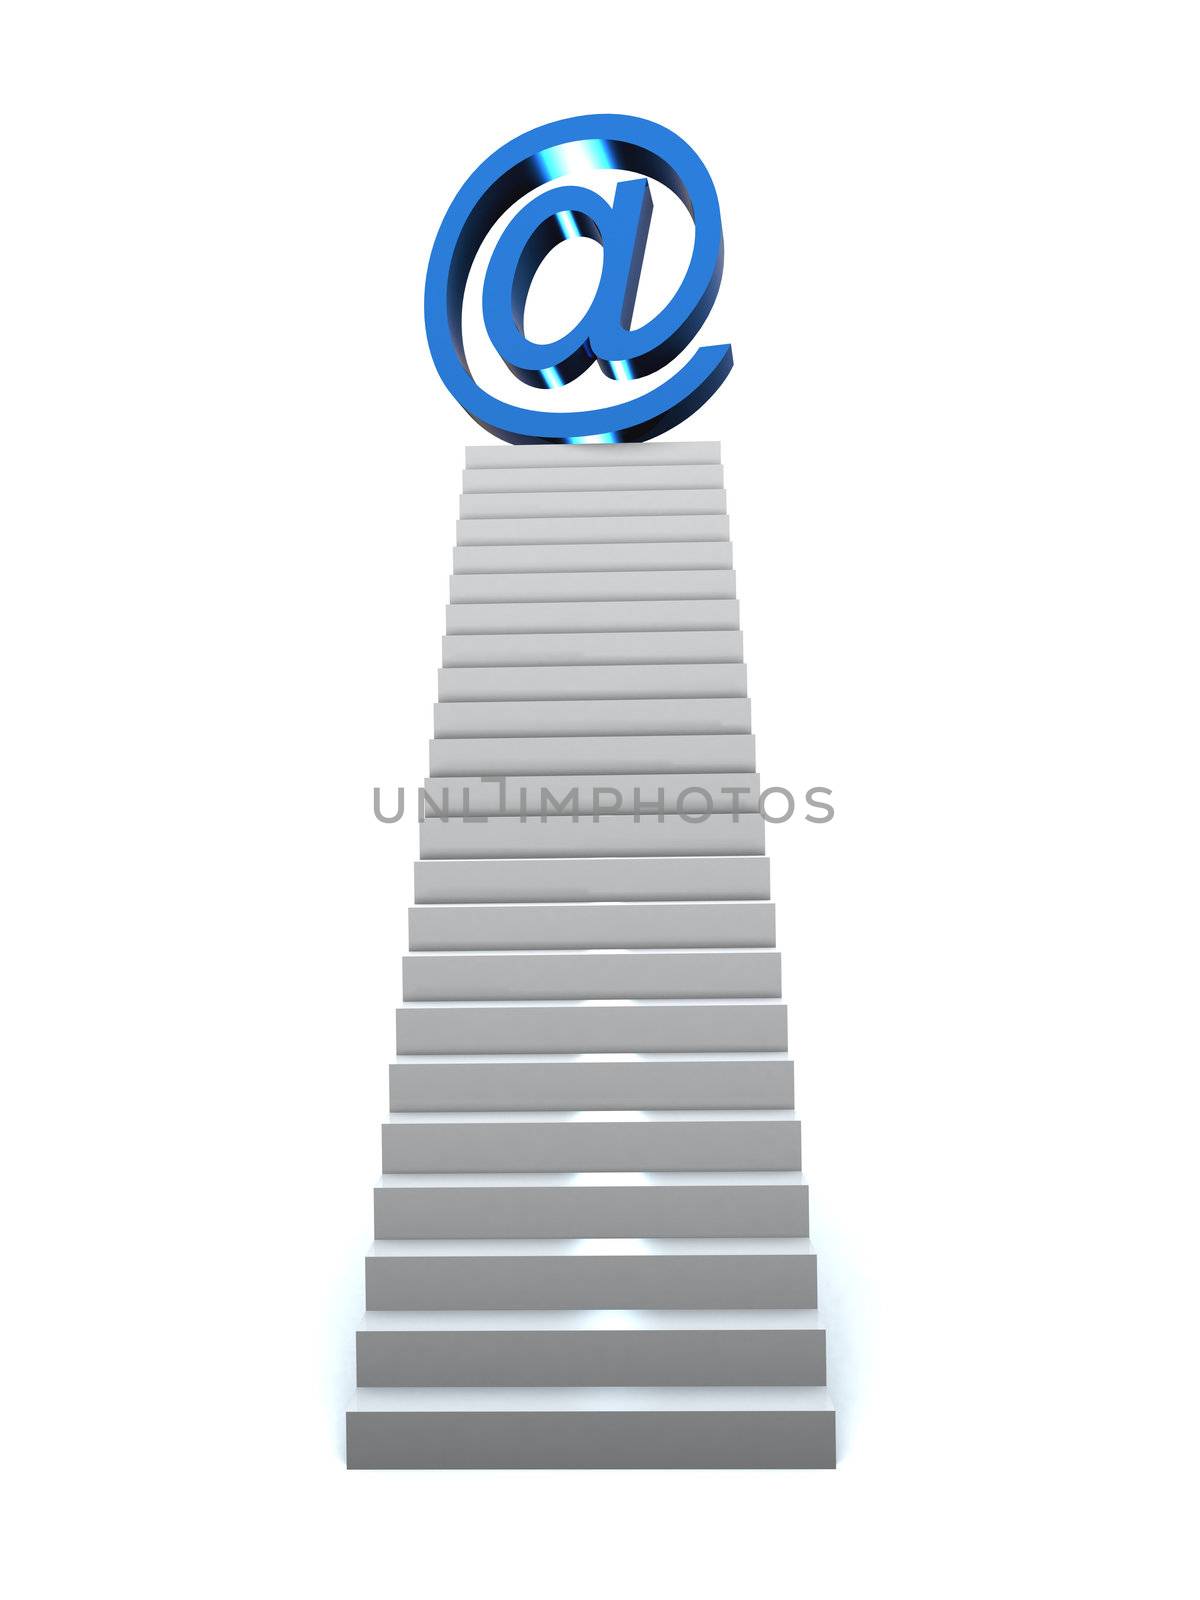 Internet business staircase by cienpies